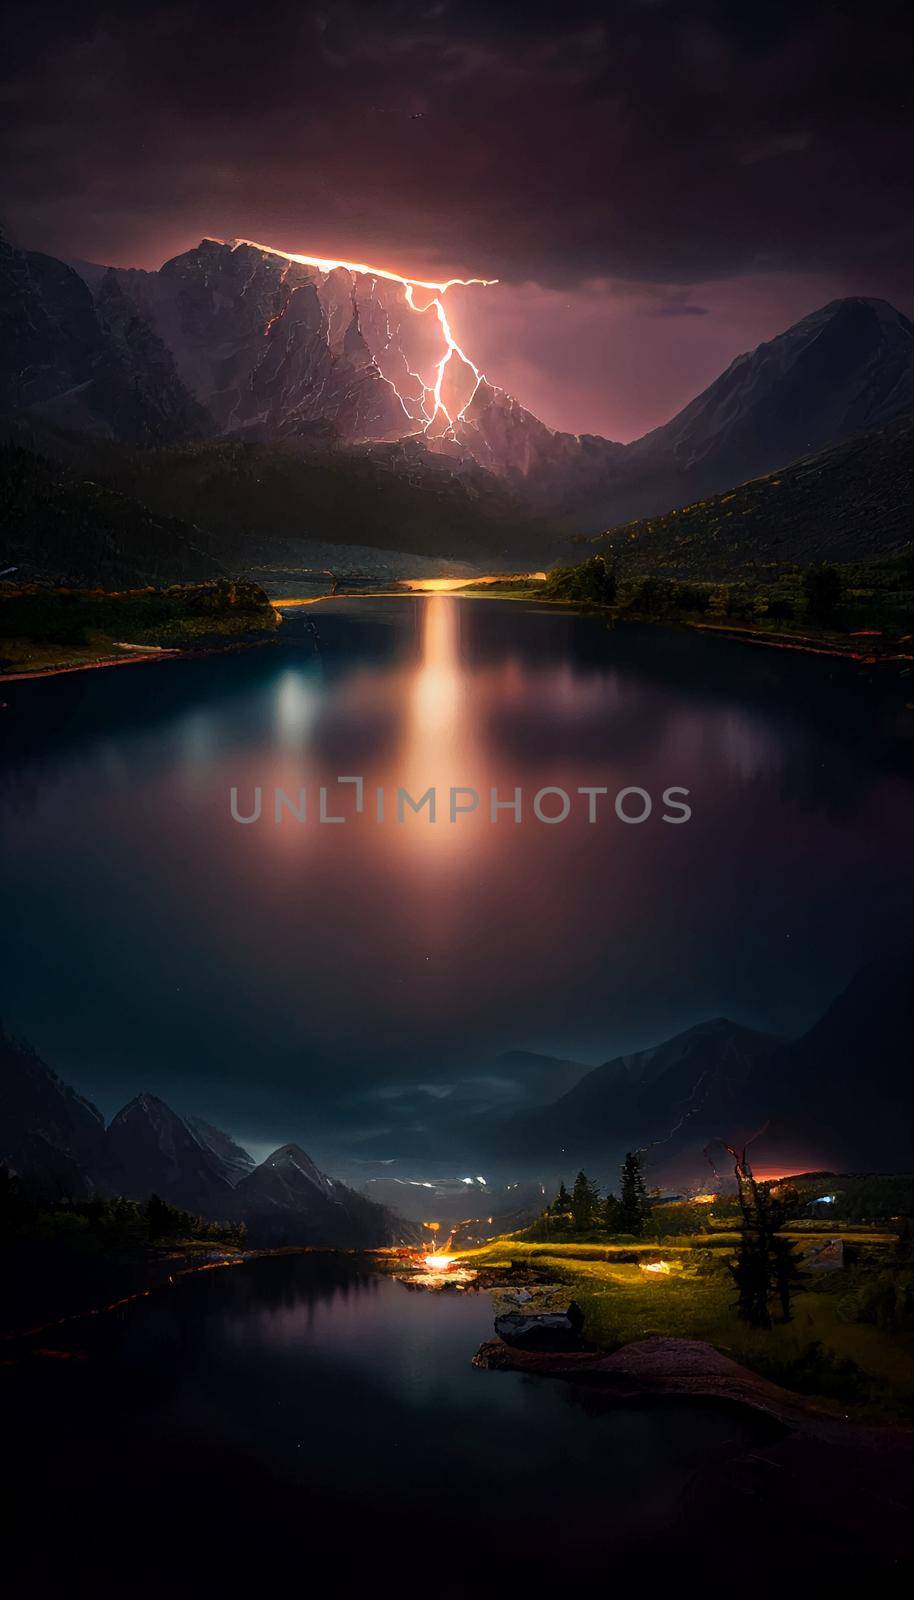 beautiful landscape with a lake surrounded with mountains illustration. illustration for wallpaper.